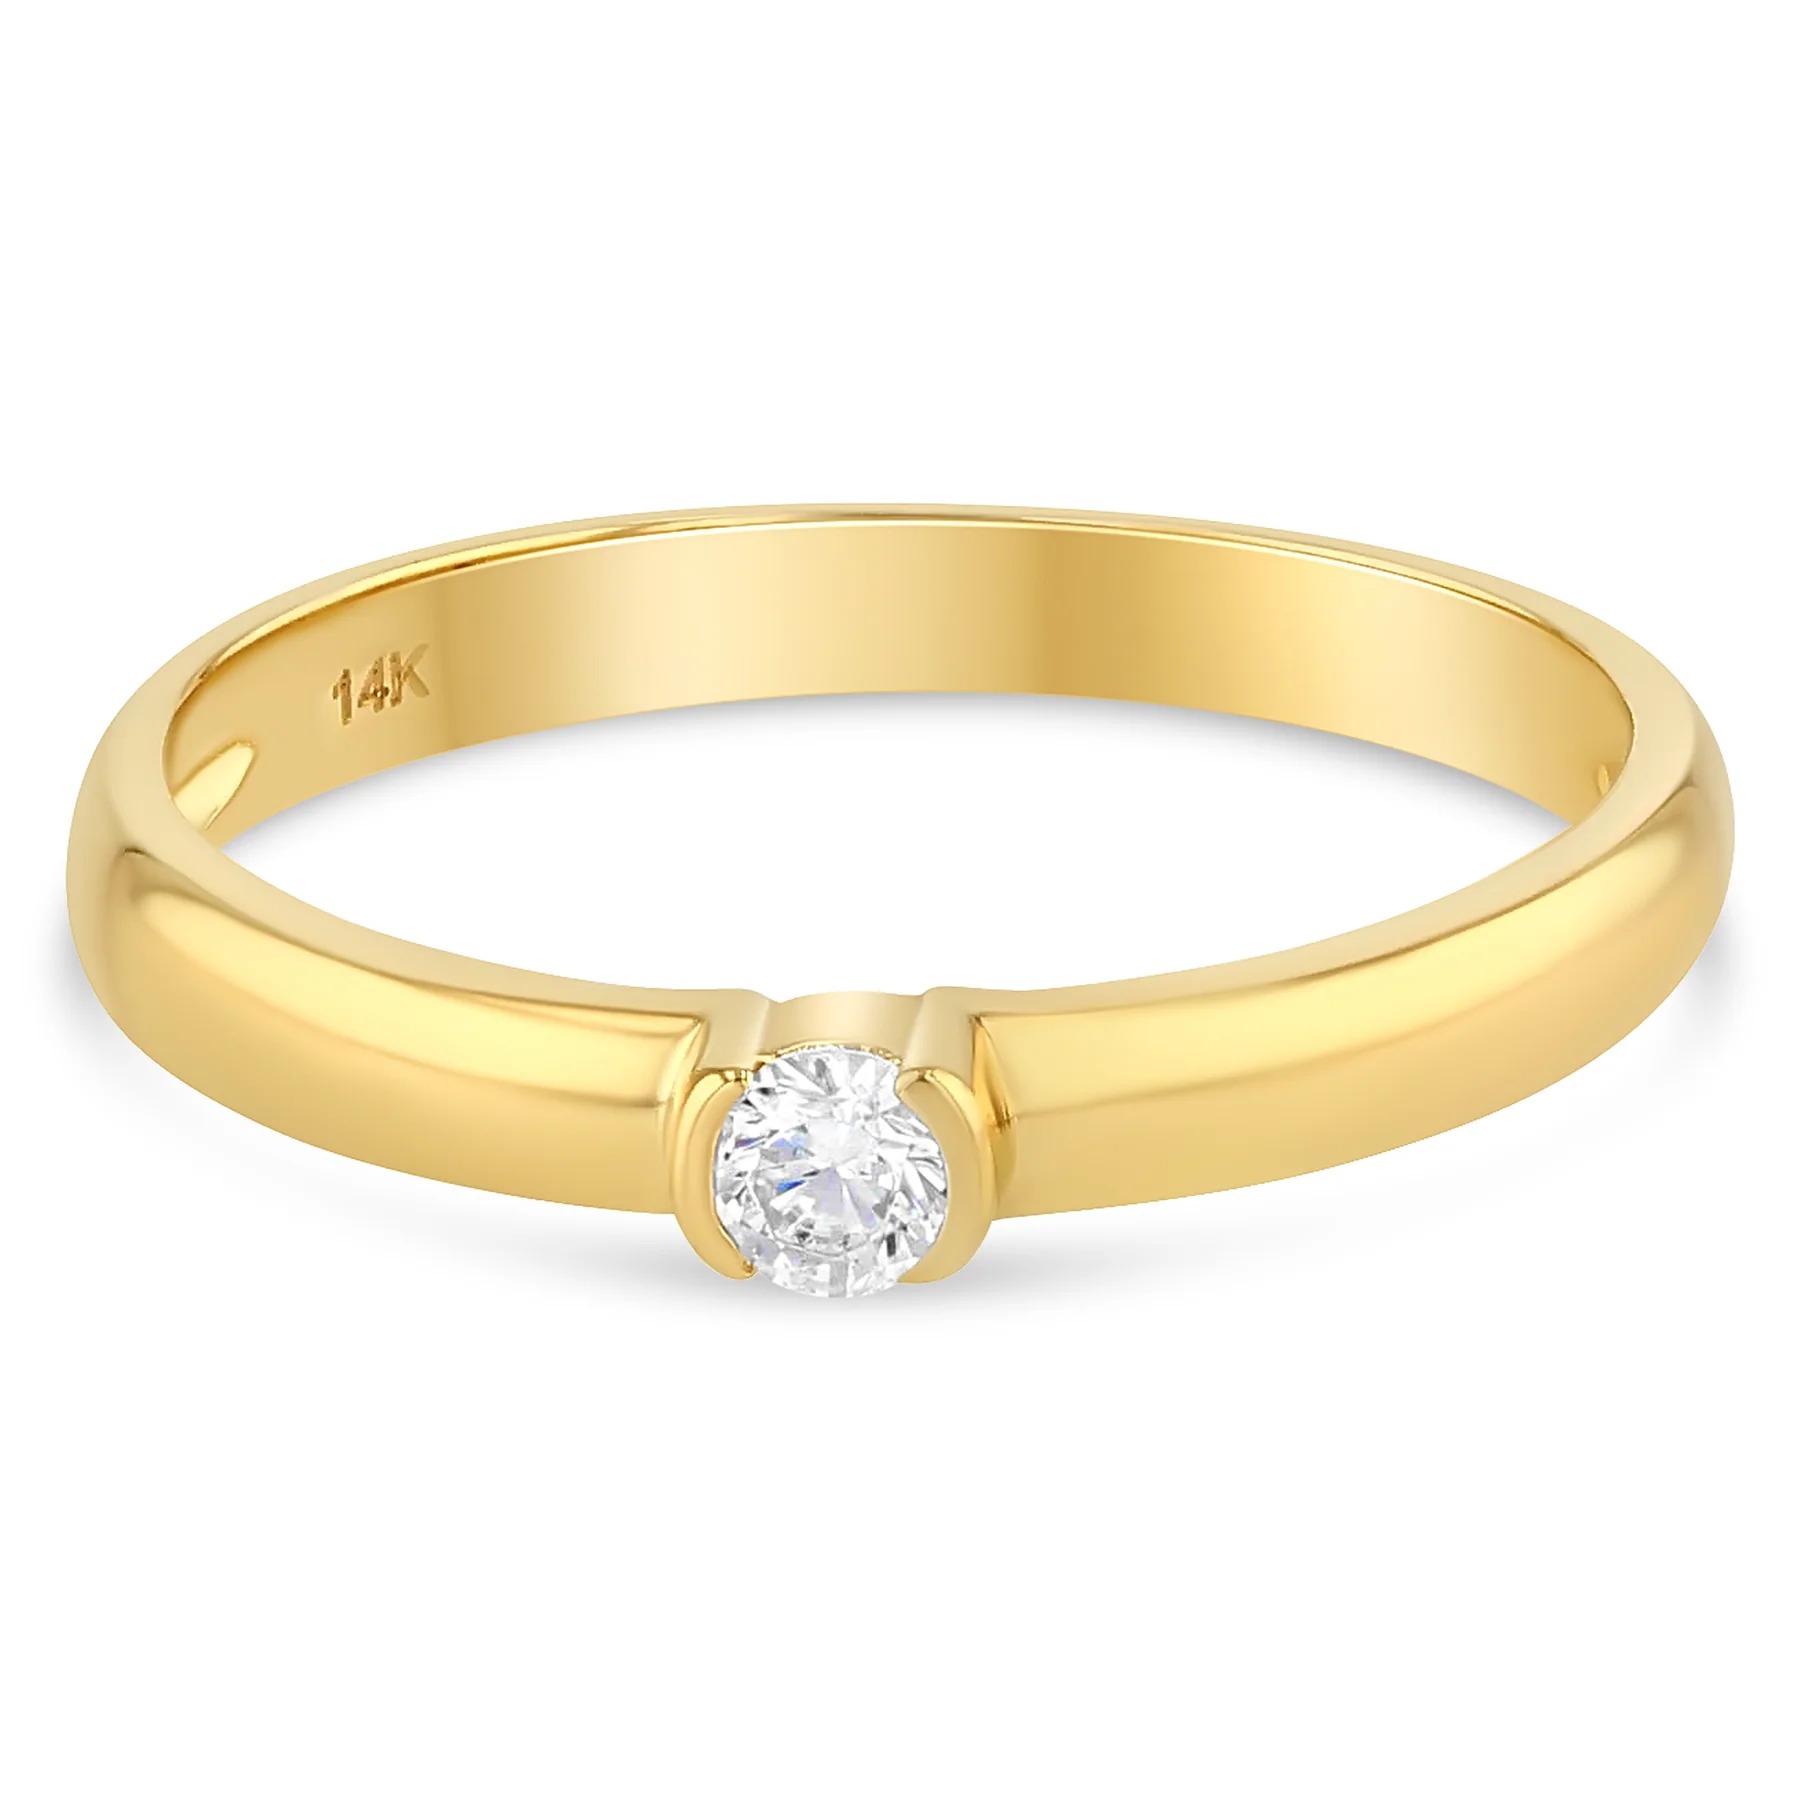 14k Gold 0.1 Ct. Round Cut Solitaire Cz Wedding Engagement Ring